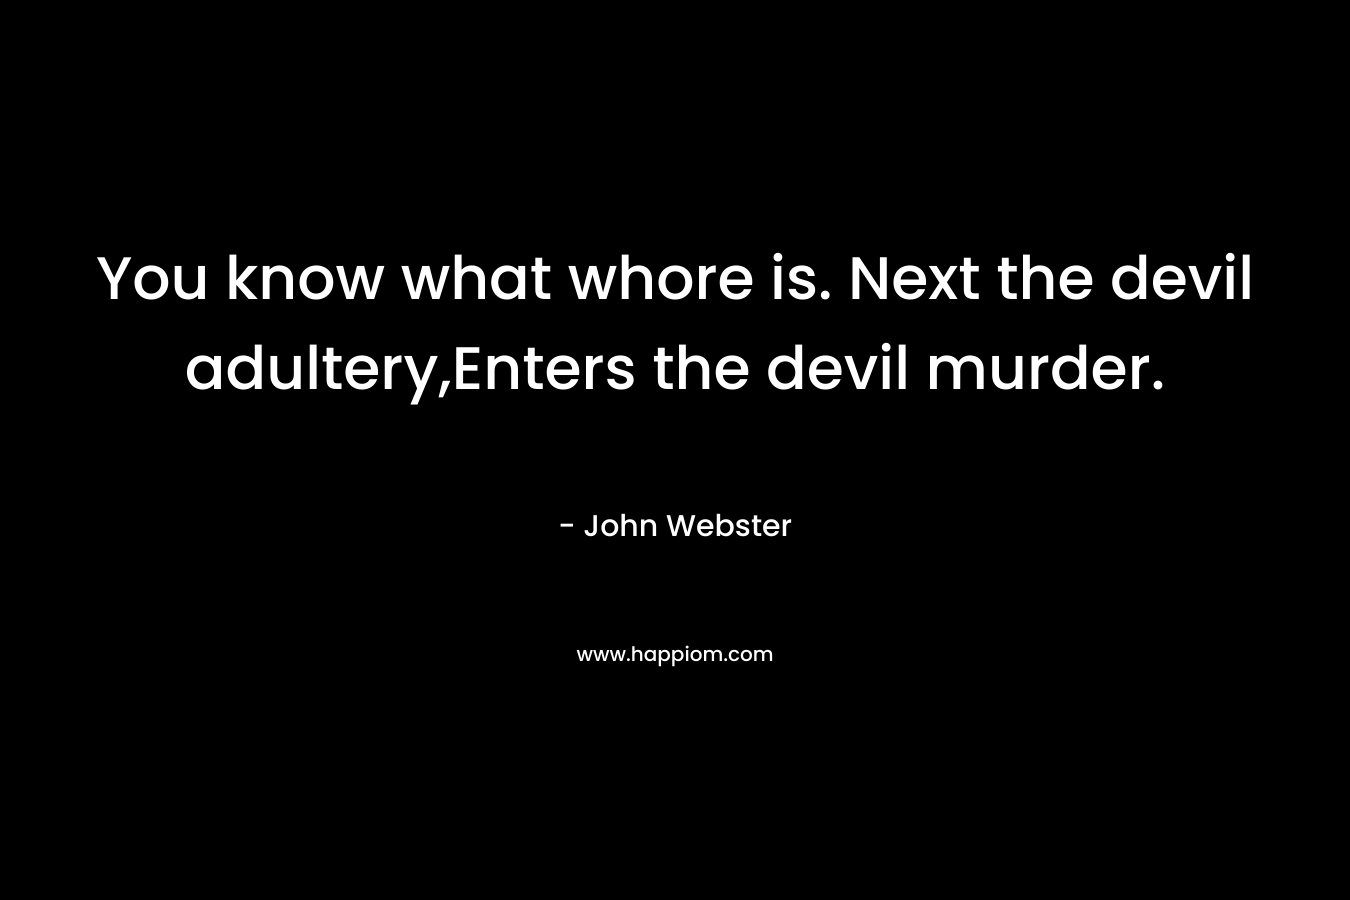 You know what whore is. Next the devil adultery,Enters the devil murder.